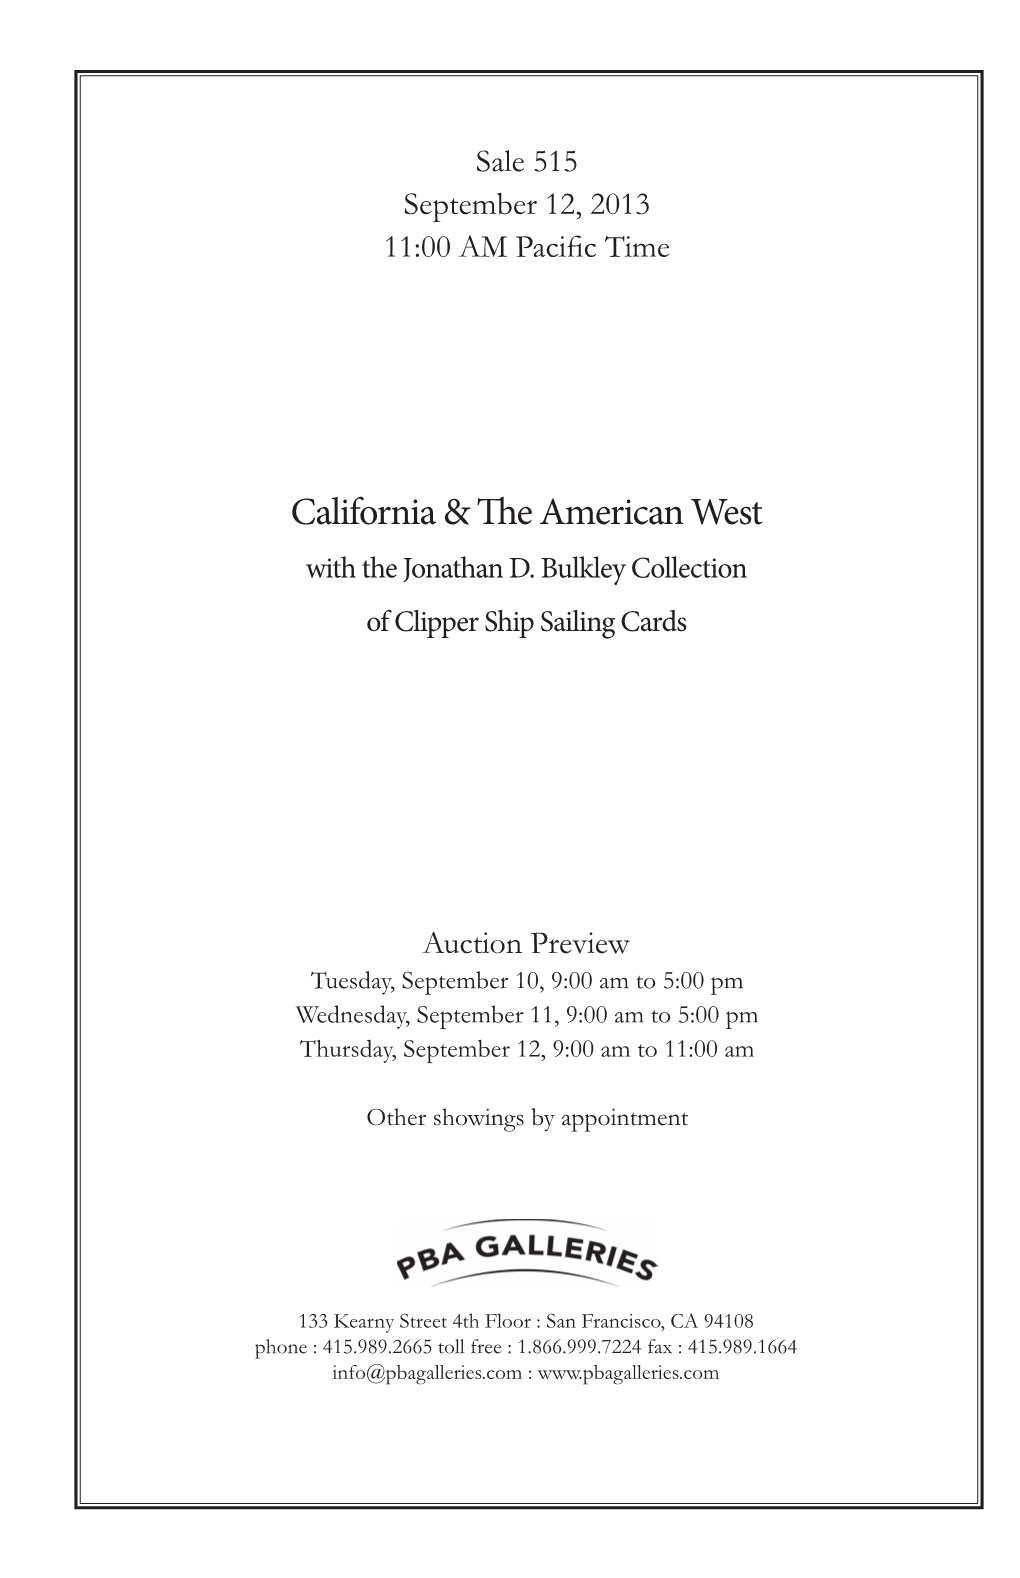 California & the American West